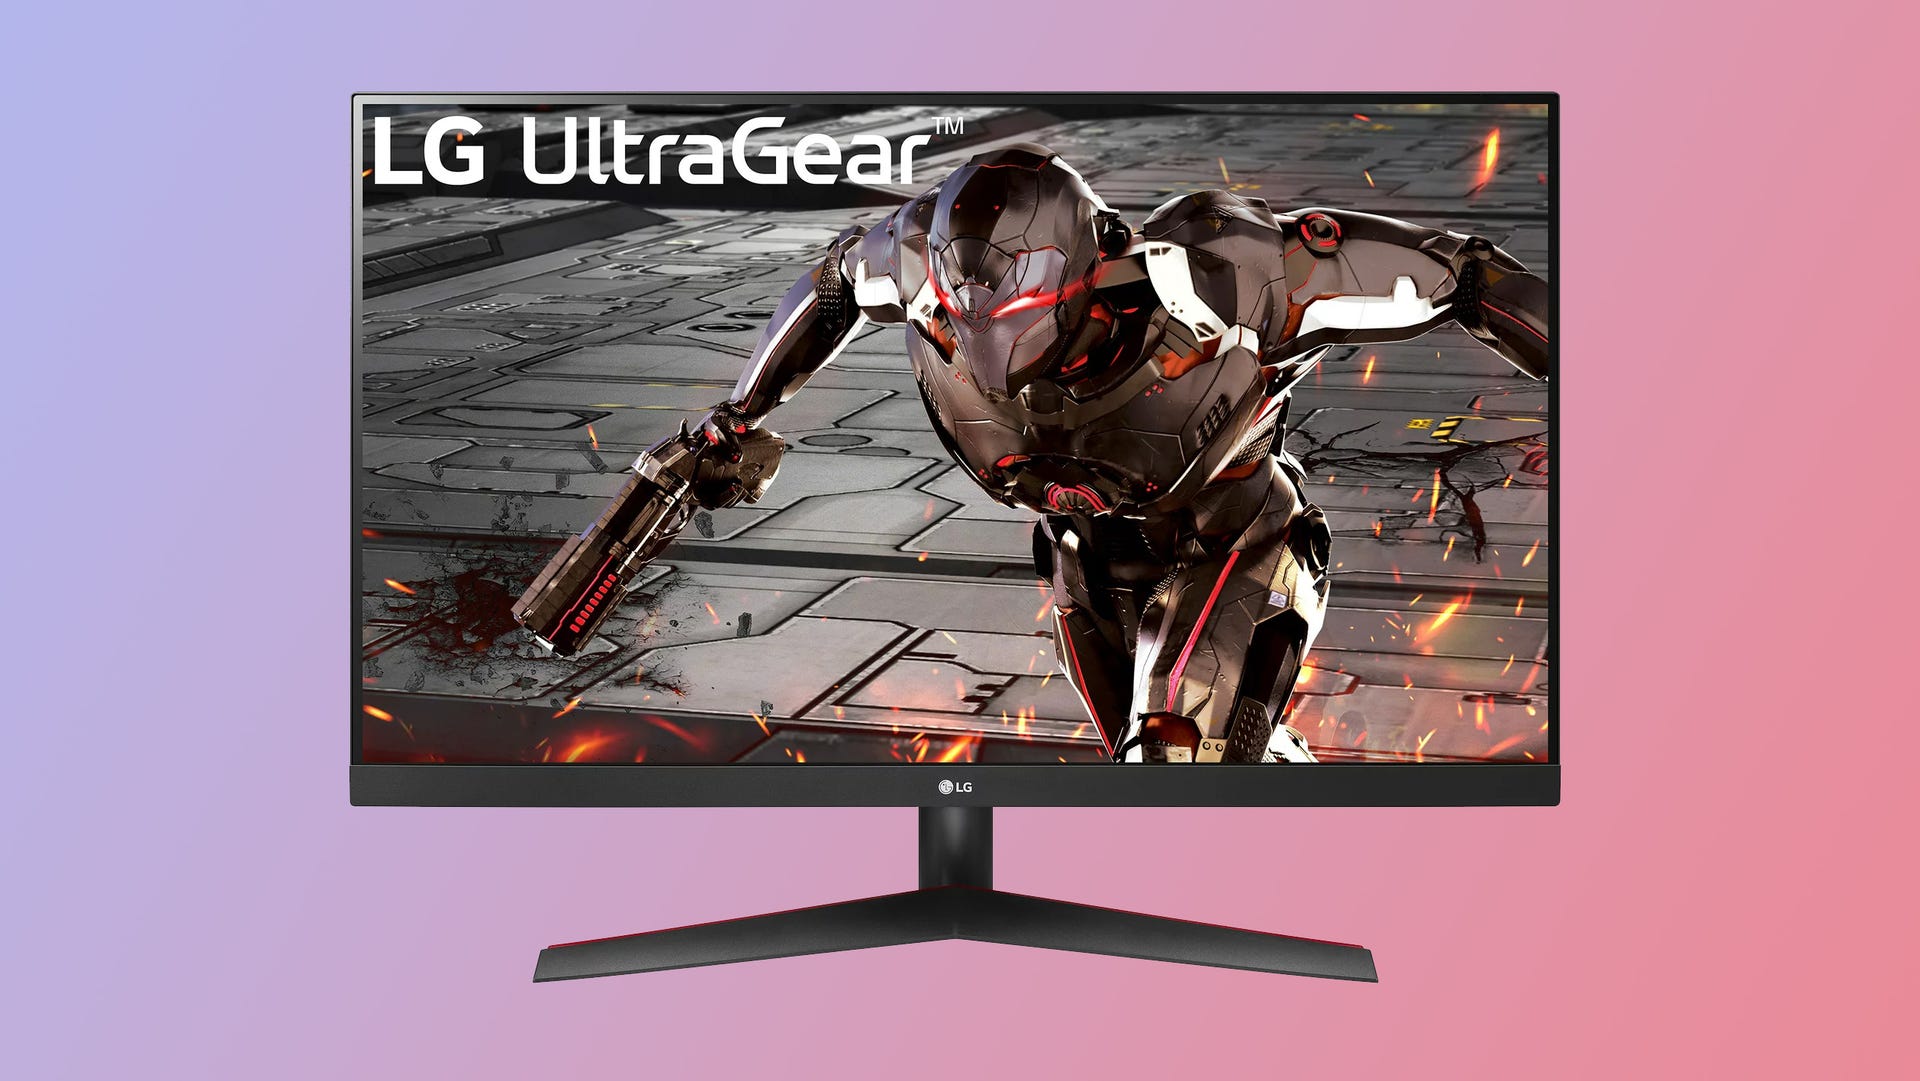 Hoc XXXII inch LG gaming monitor est ad $ CLII cum Newsletter signup code